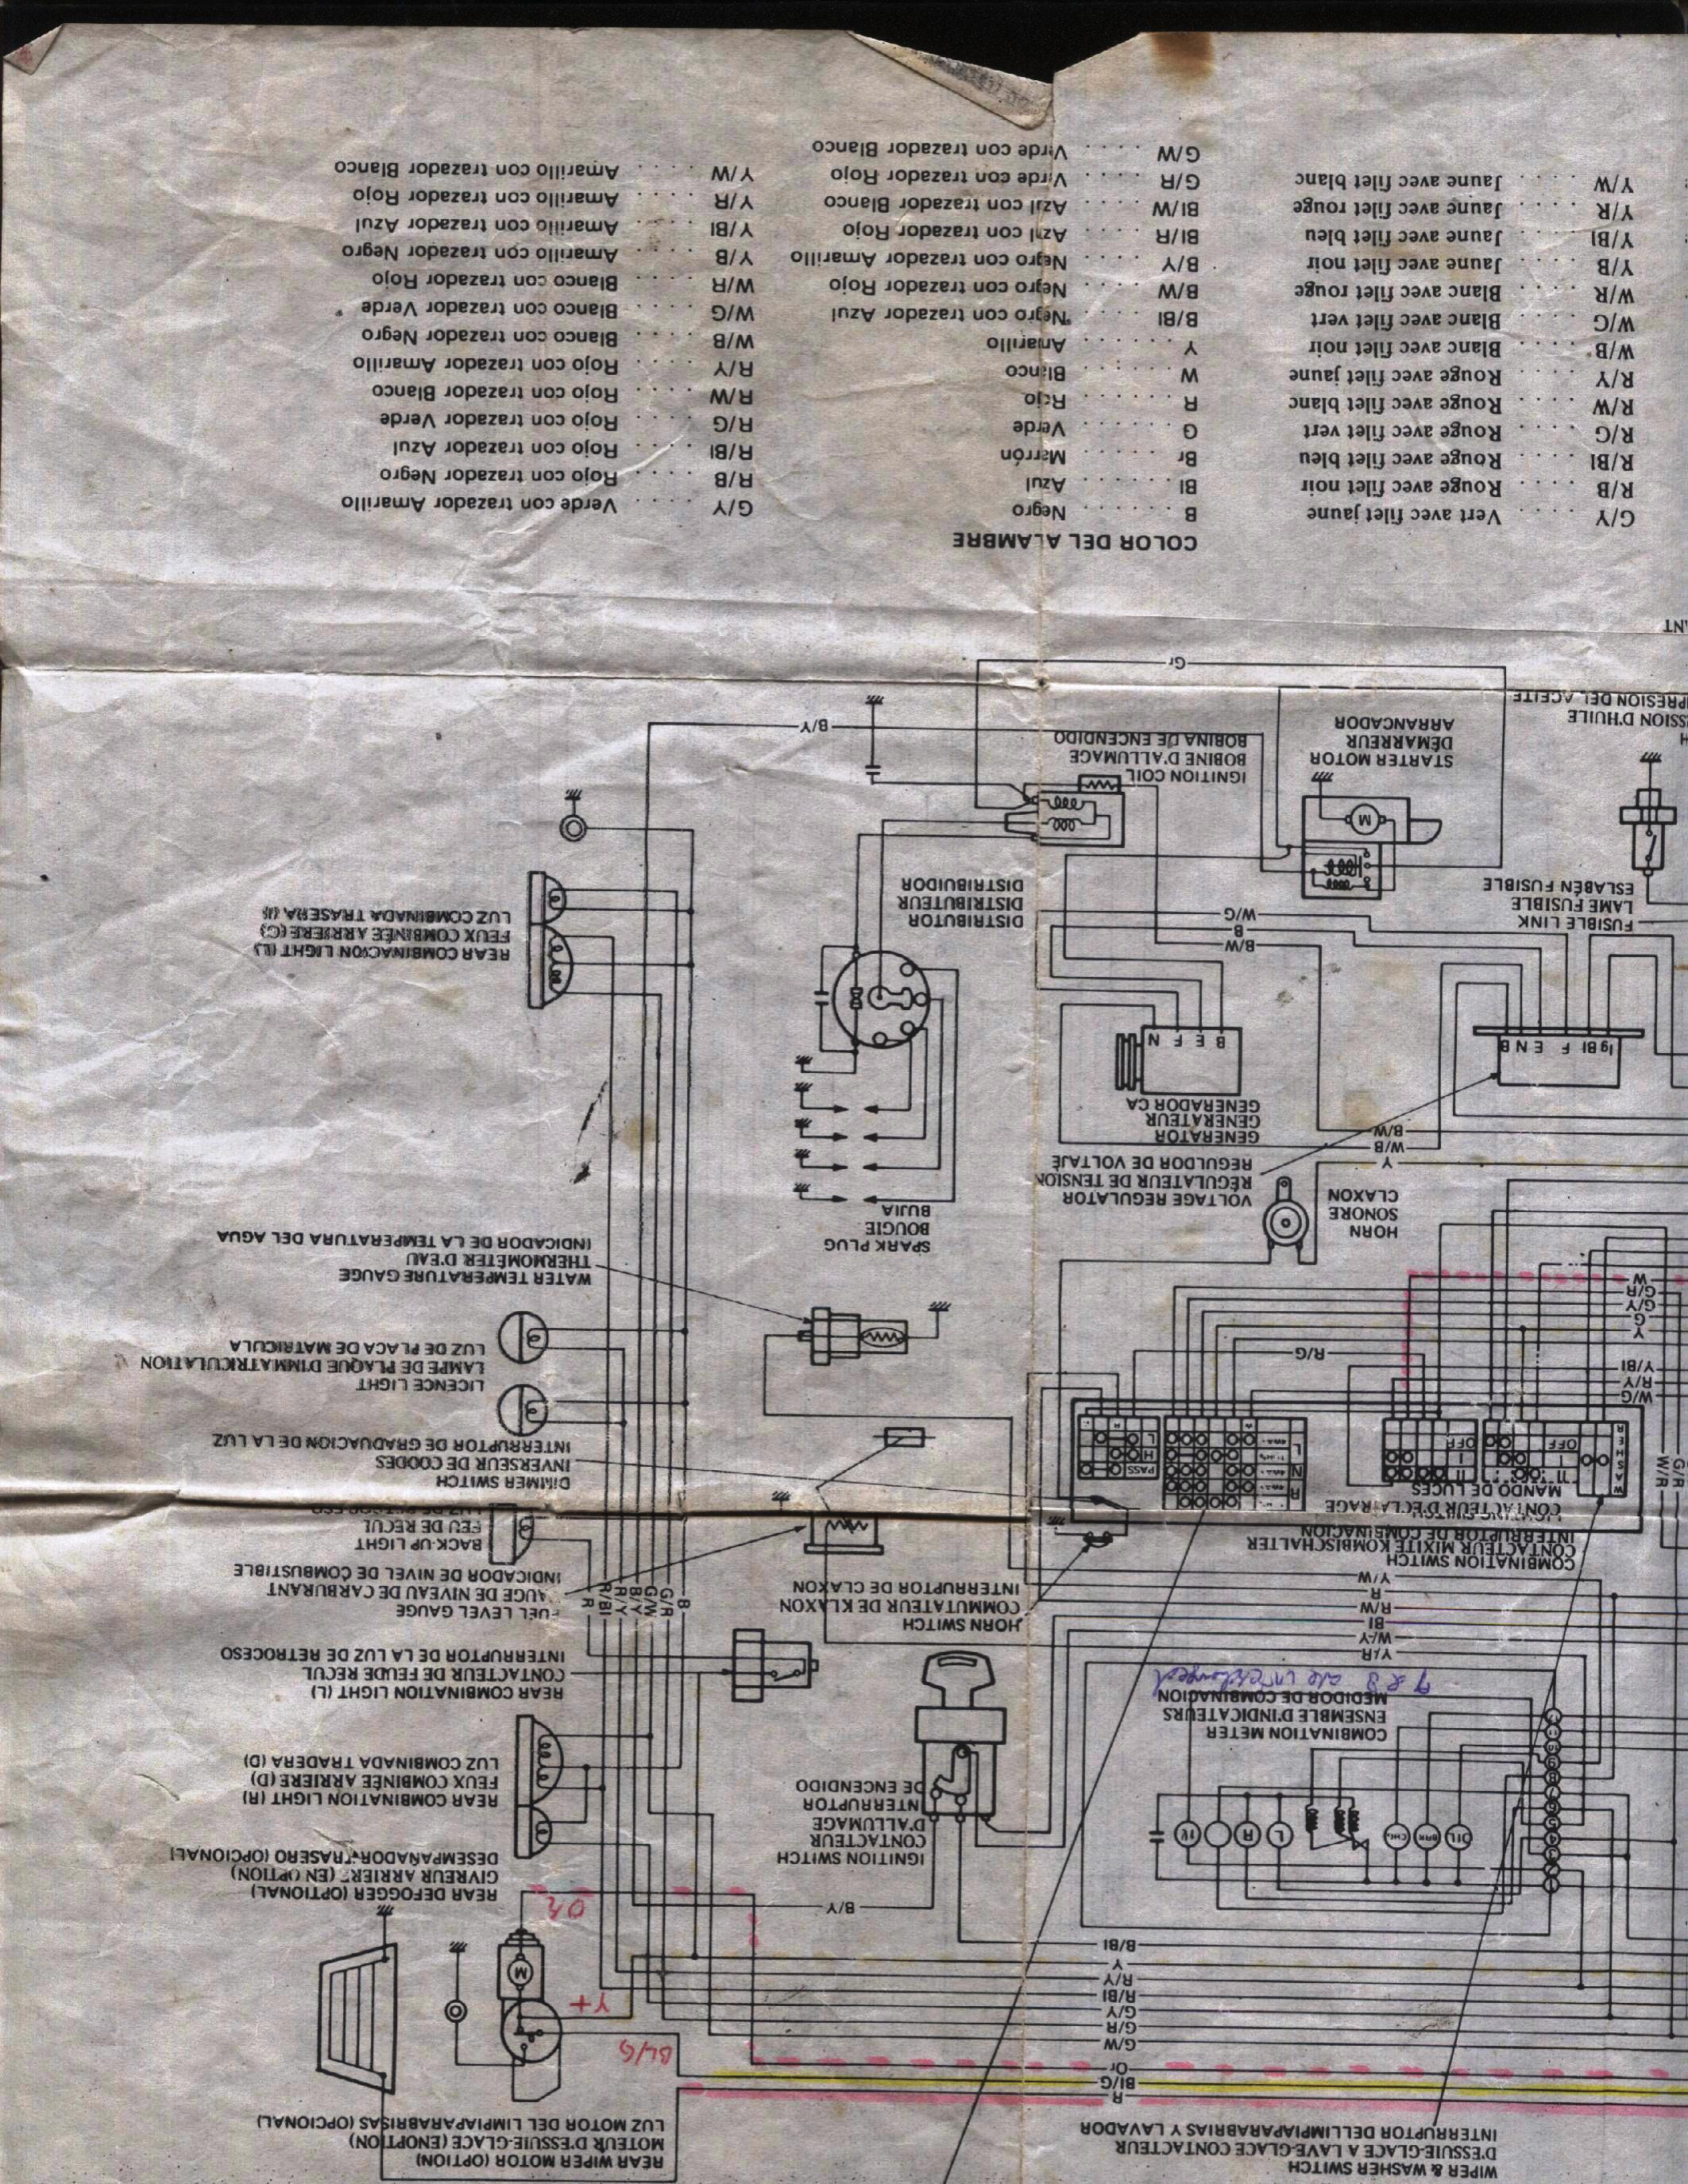 Suzuki Van 800CC Electrical Wiring diagram for Suzuki Van in Pakistan from 83 to 2009, only the name change to Bolan